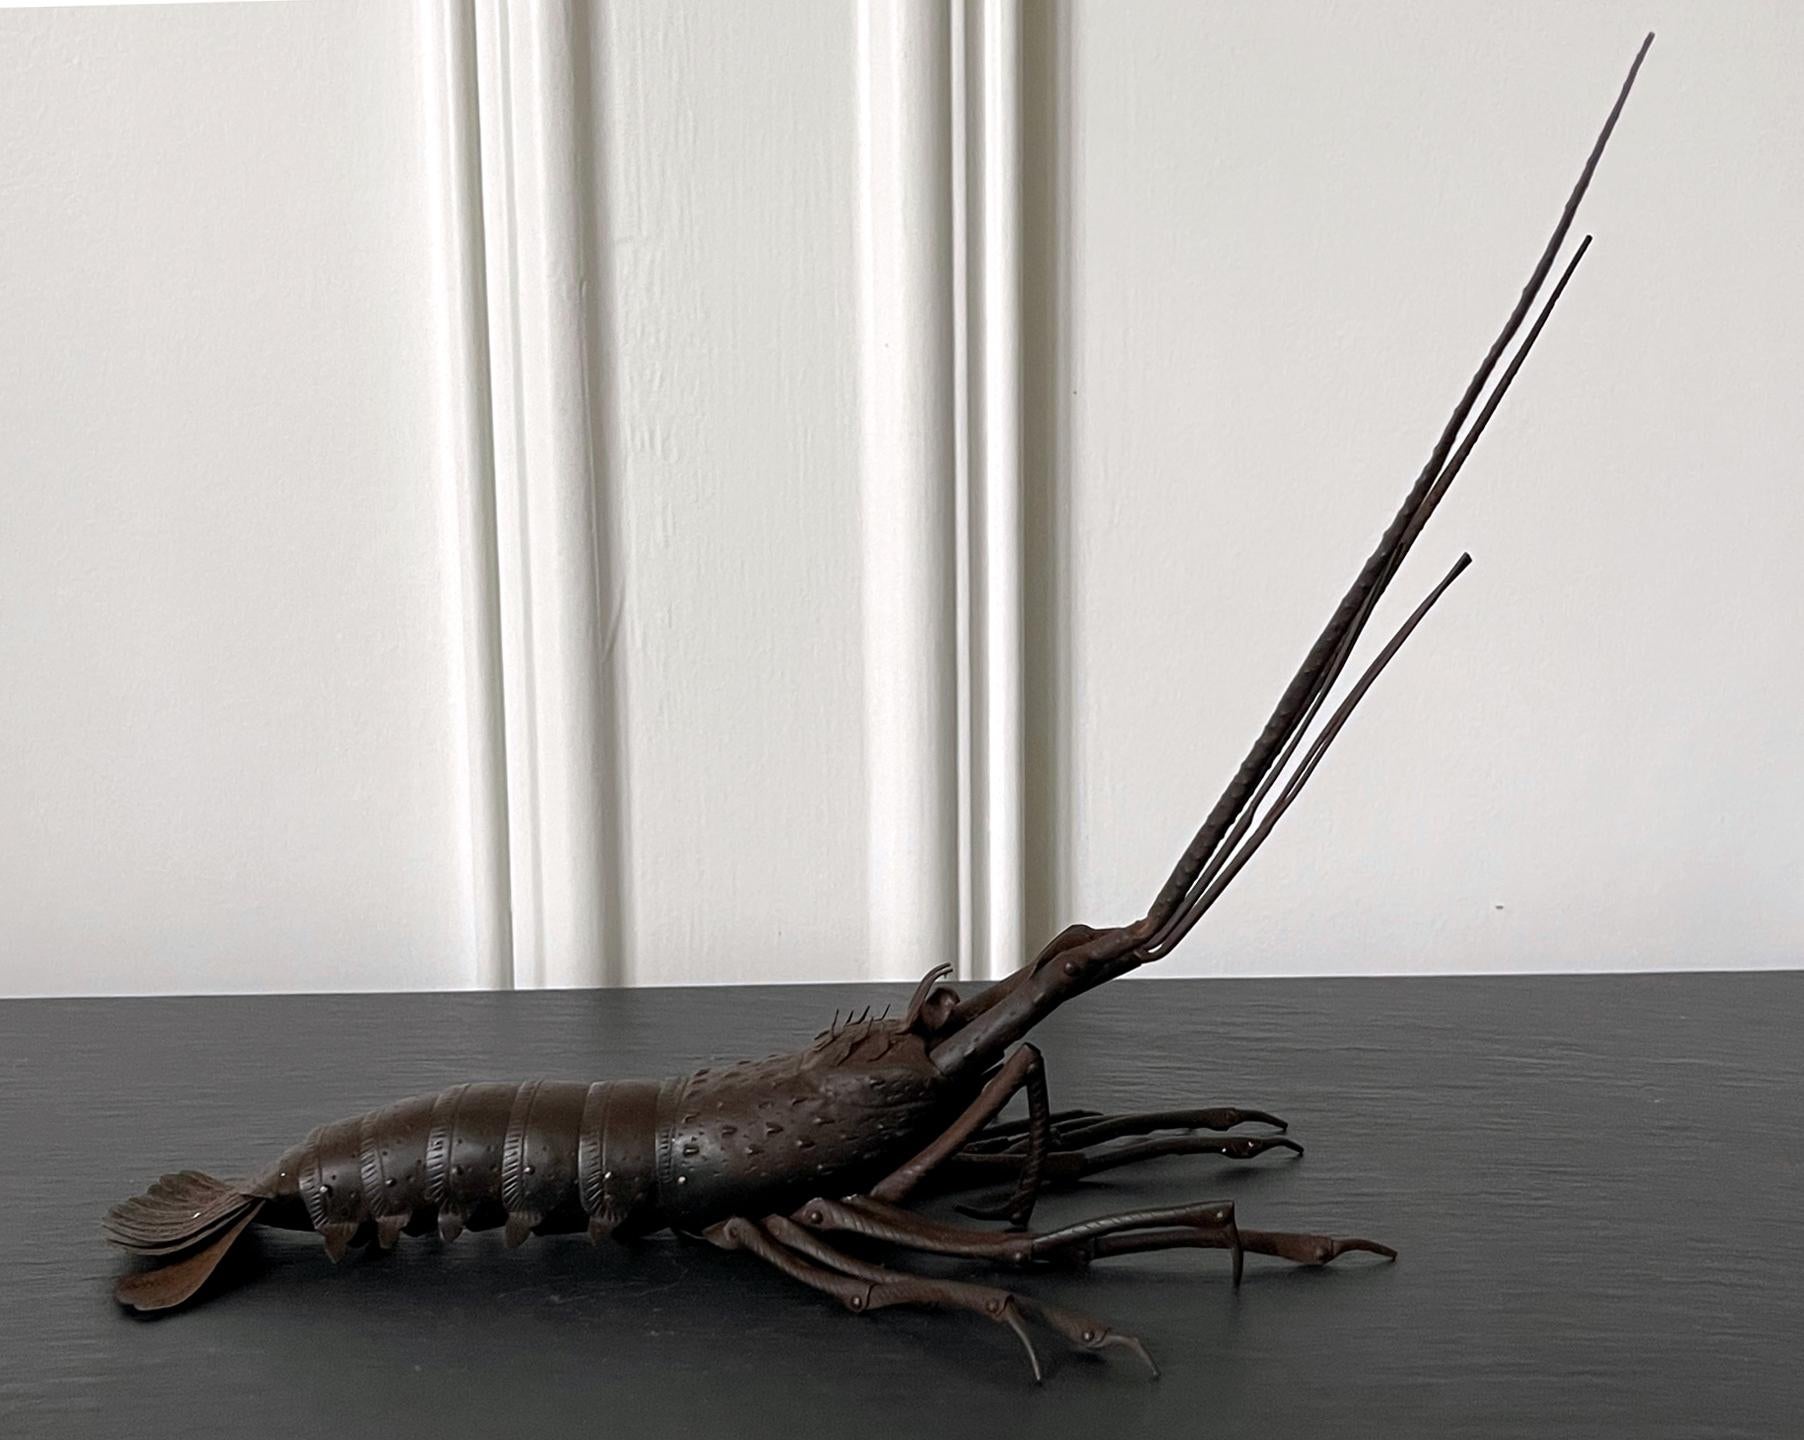 A large articulate spiny lobster (Ise-Ebi) as an ornamental display item, known in Japanese as Jizai Okimono, was made by Myochin Muneyuki circa 1940-50s. The lobster was meticulously constructed in life-size with patinated iron in a realistic